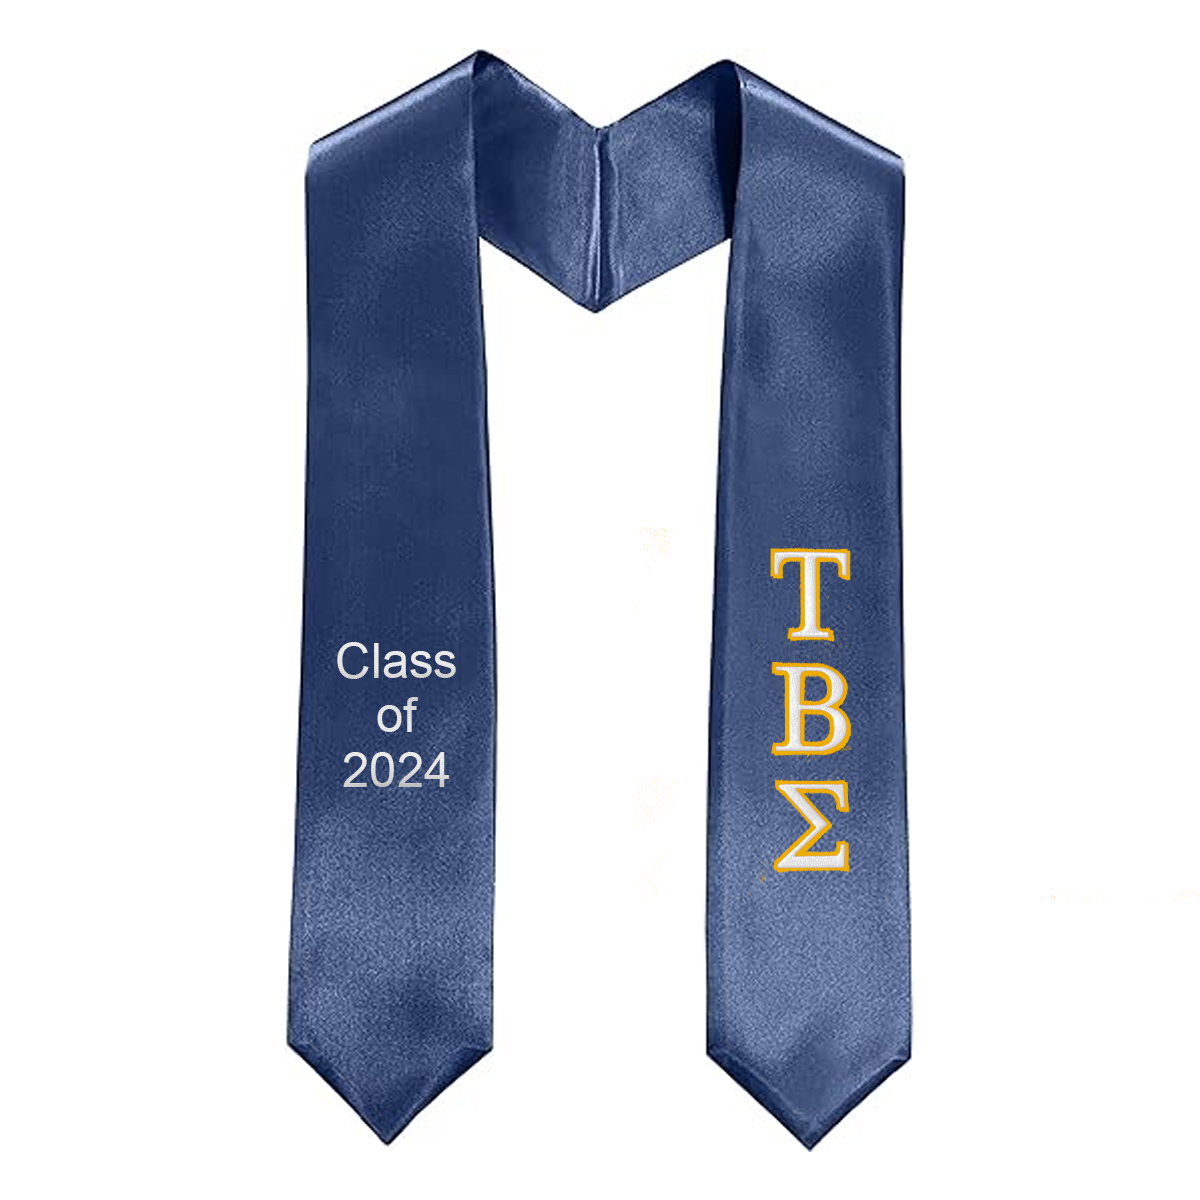 Greek Graduation Stole with Embroidery - EMB